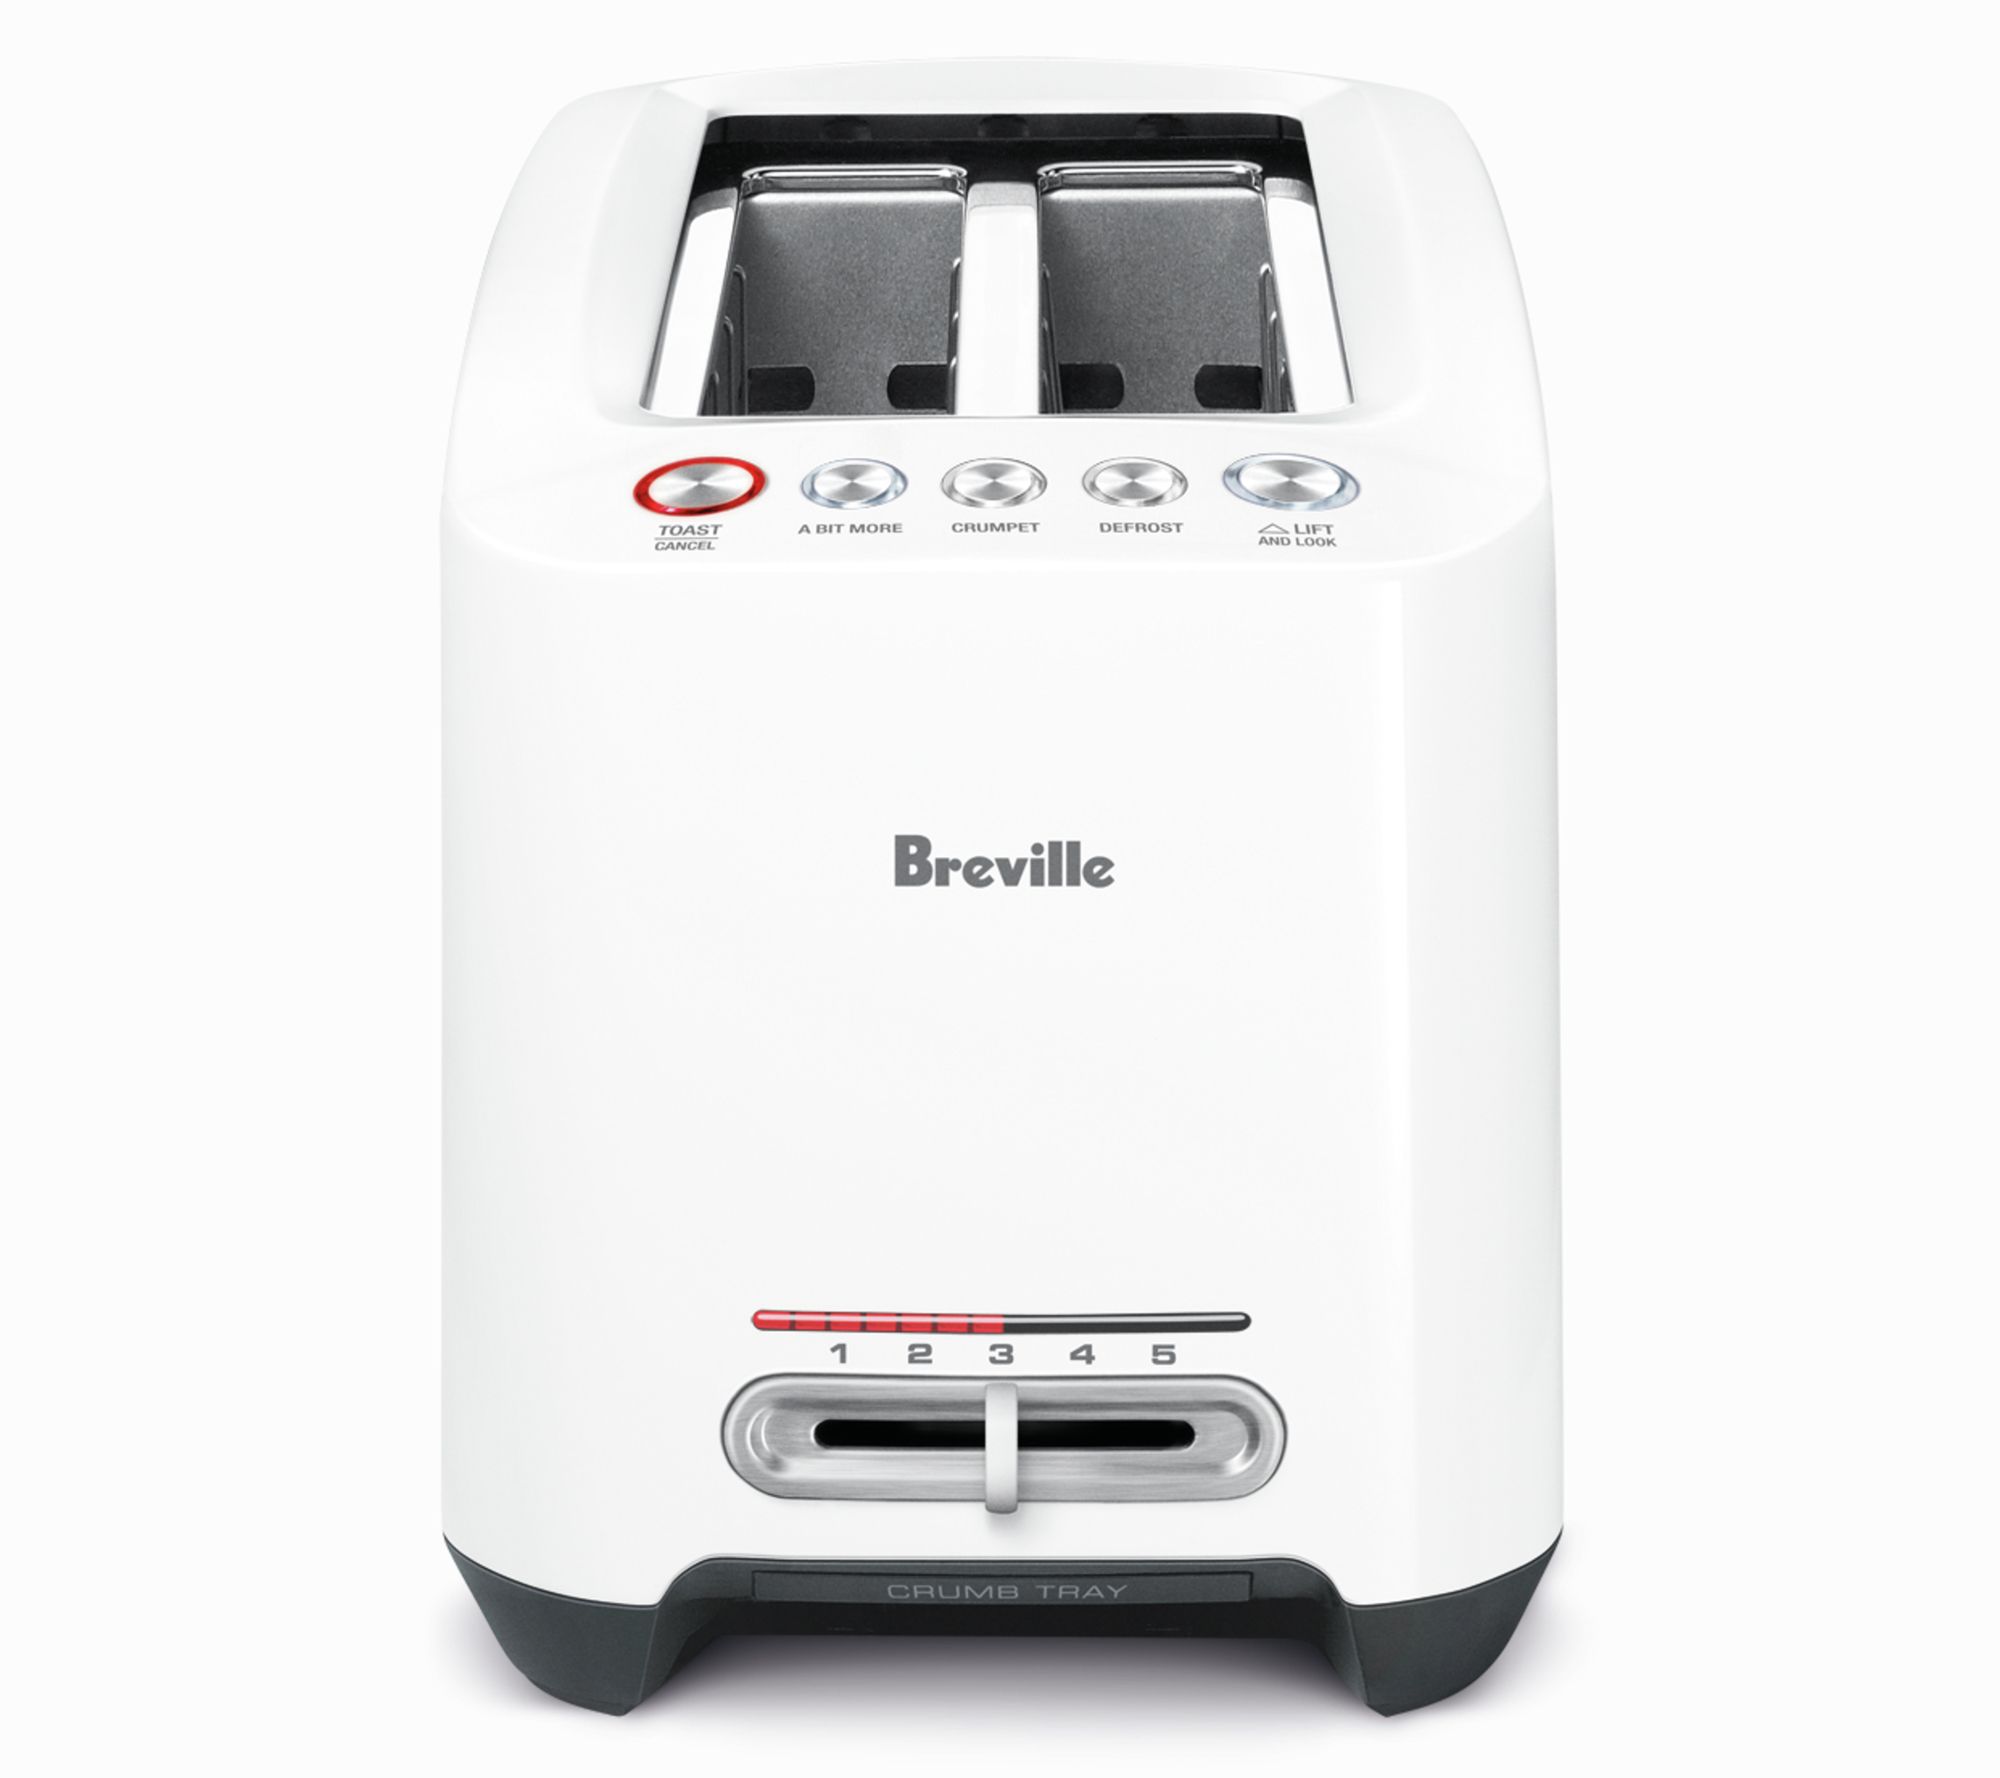 Breville the A Bit More 4-Slice Toaster